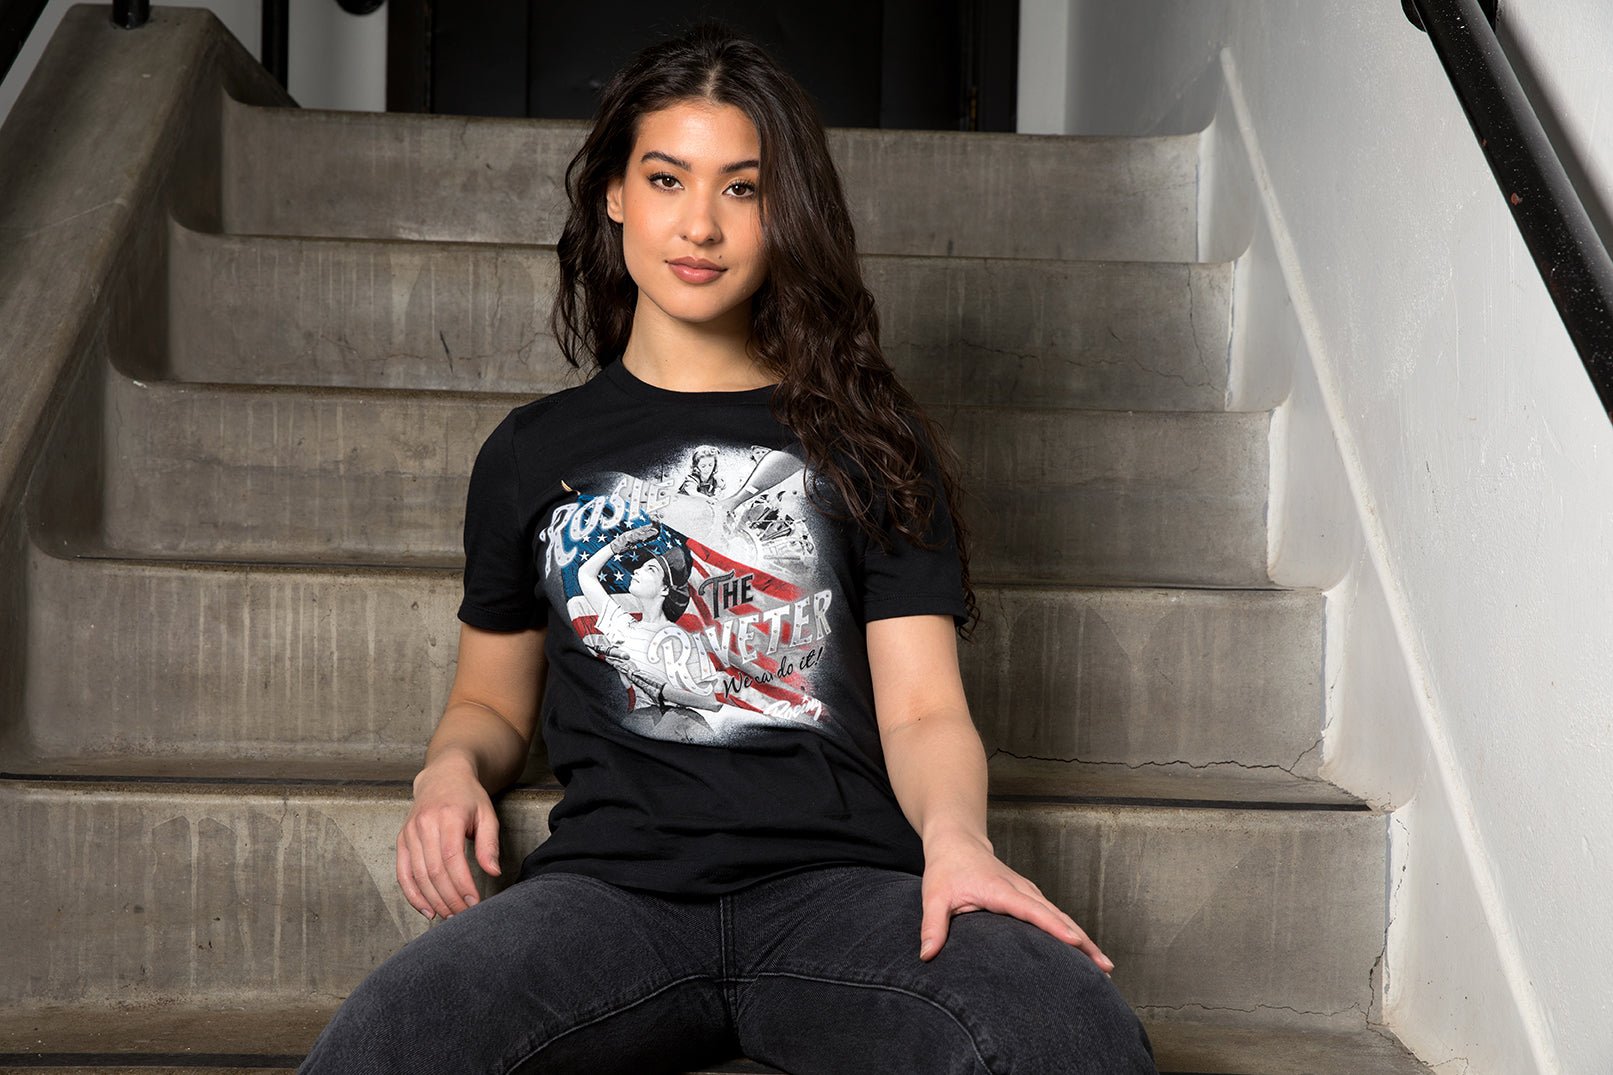 Rosie the Riveter Officially Licensed Aeroplane Apparel Co. Women's T-Shirt - PilotMall.com